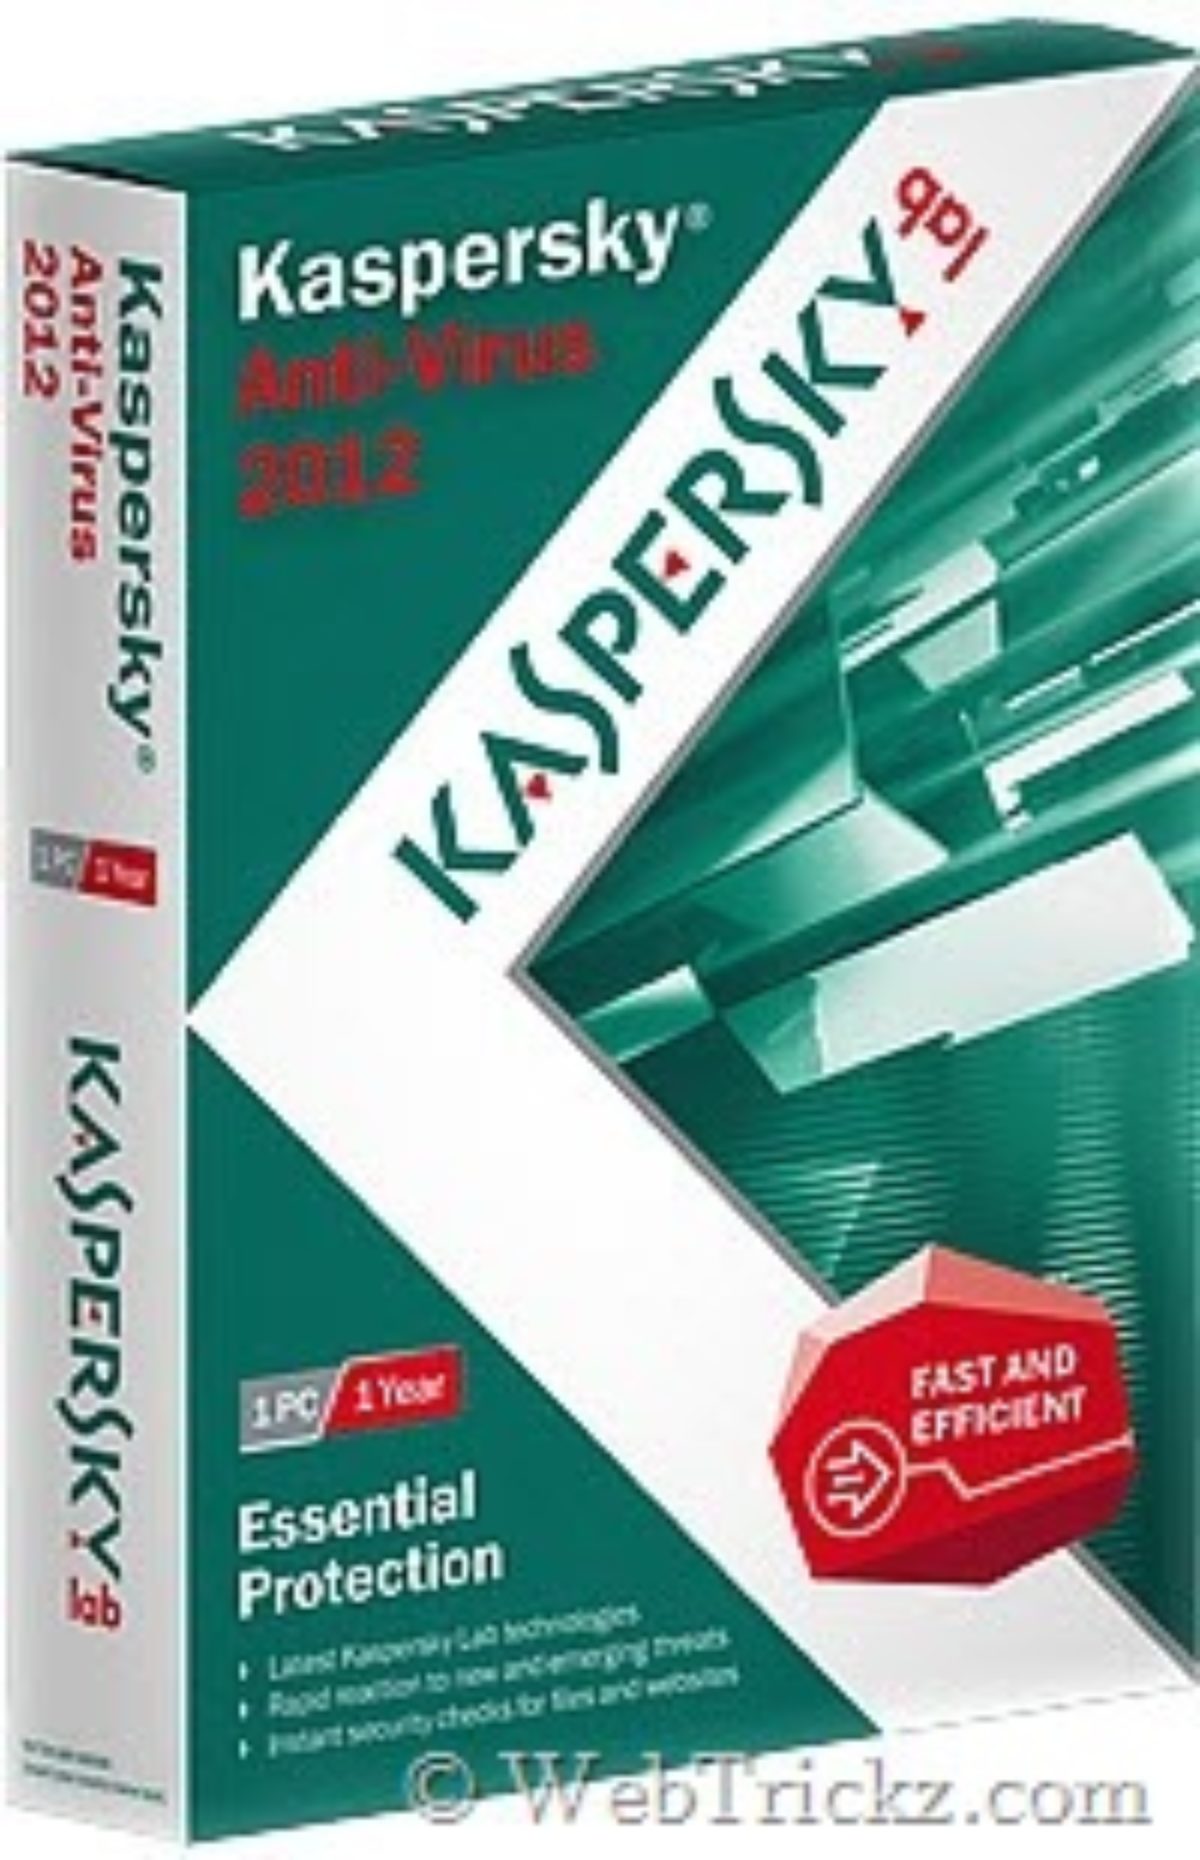 You are currently viewing Kaspersky Anti-Virus 2012 평가판을 어떻게 복원합니까?